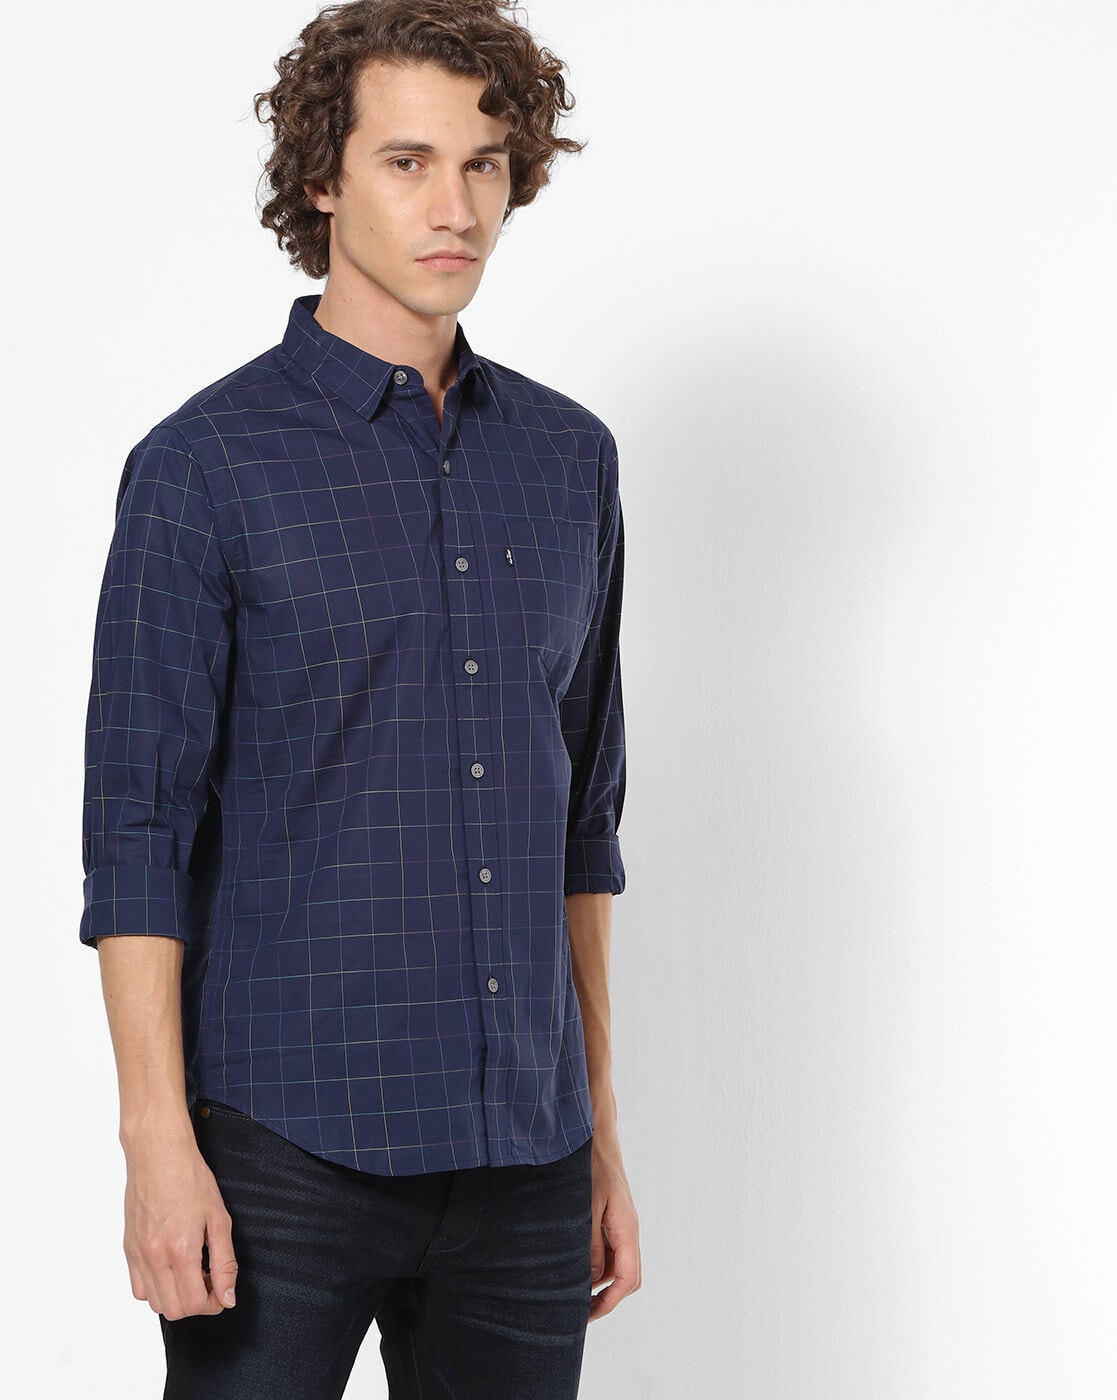 Buy Navy Blue Shirts for Men by LEVIS 